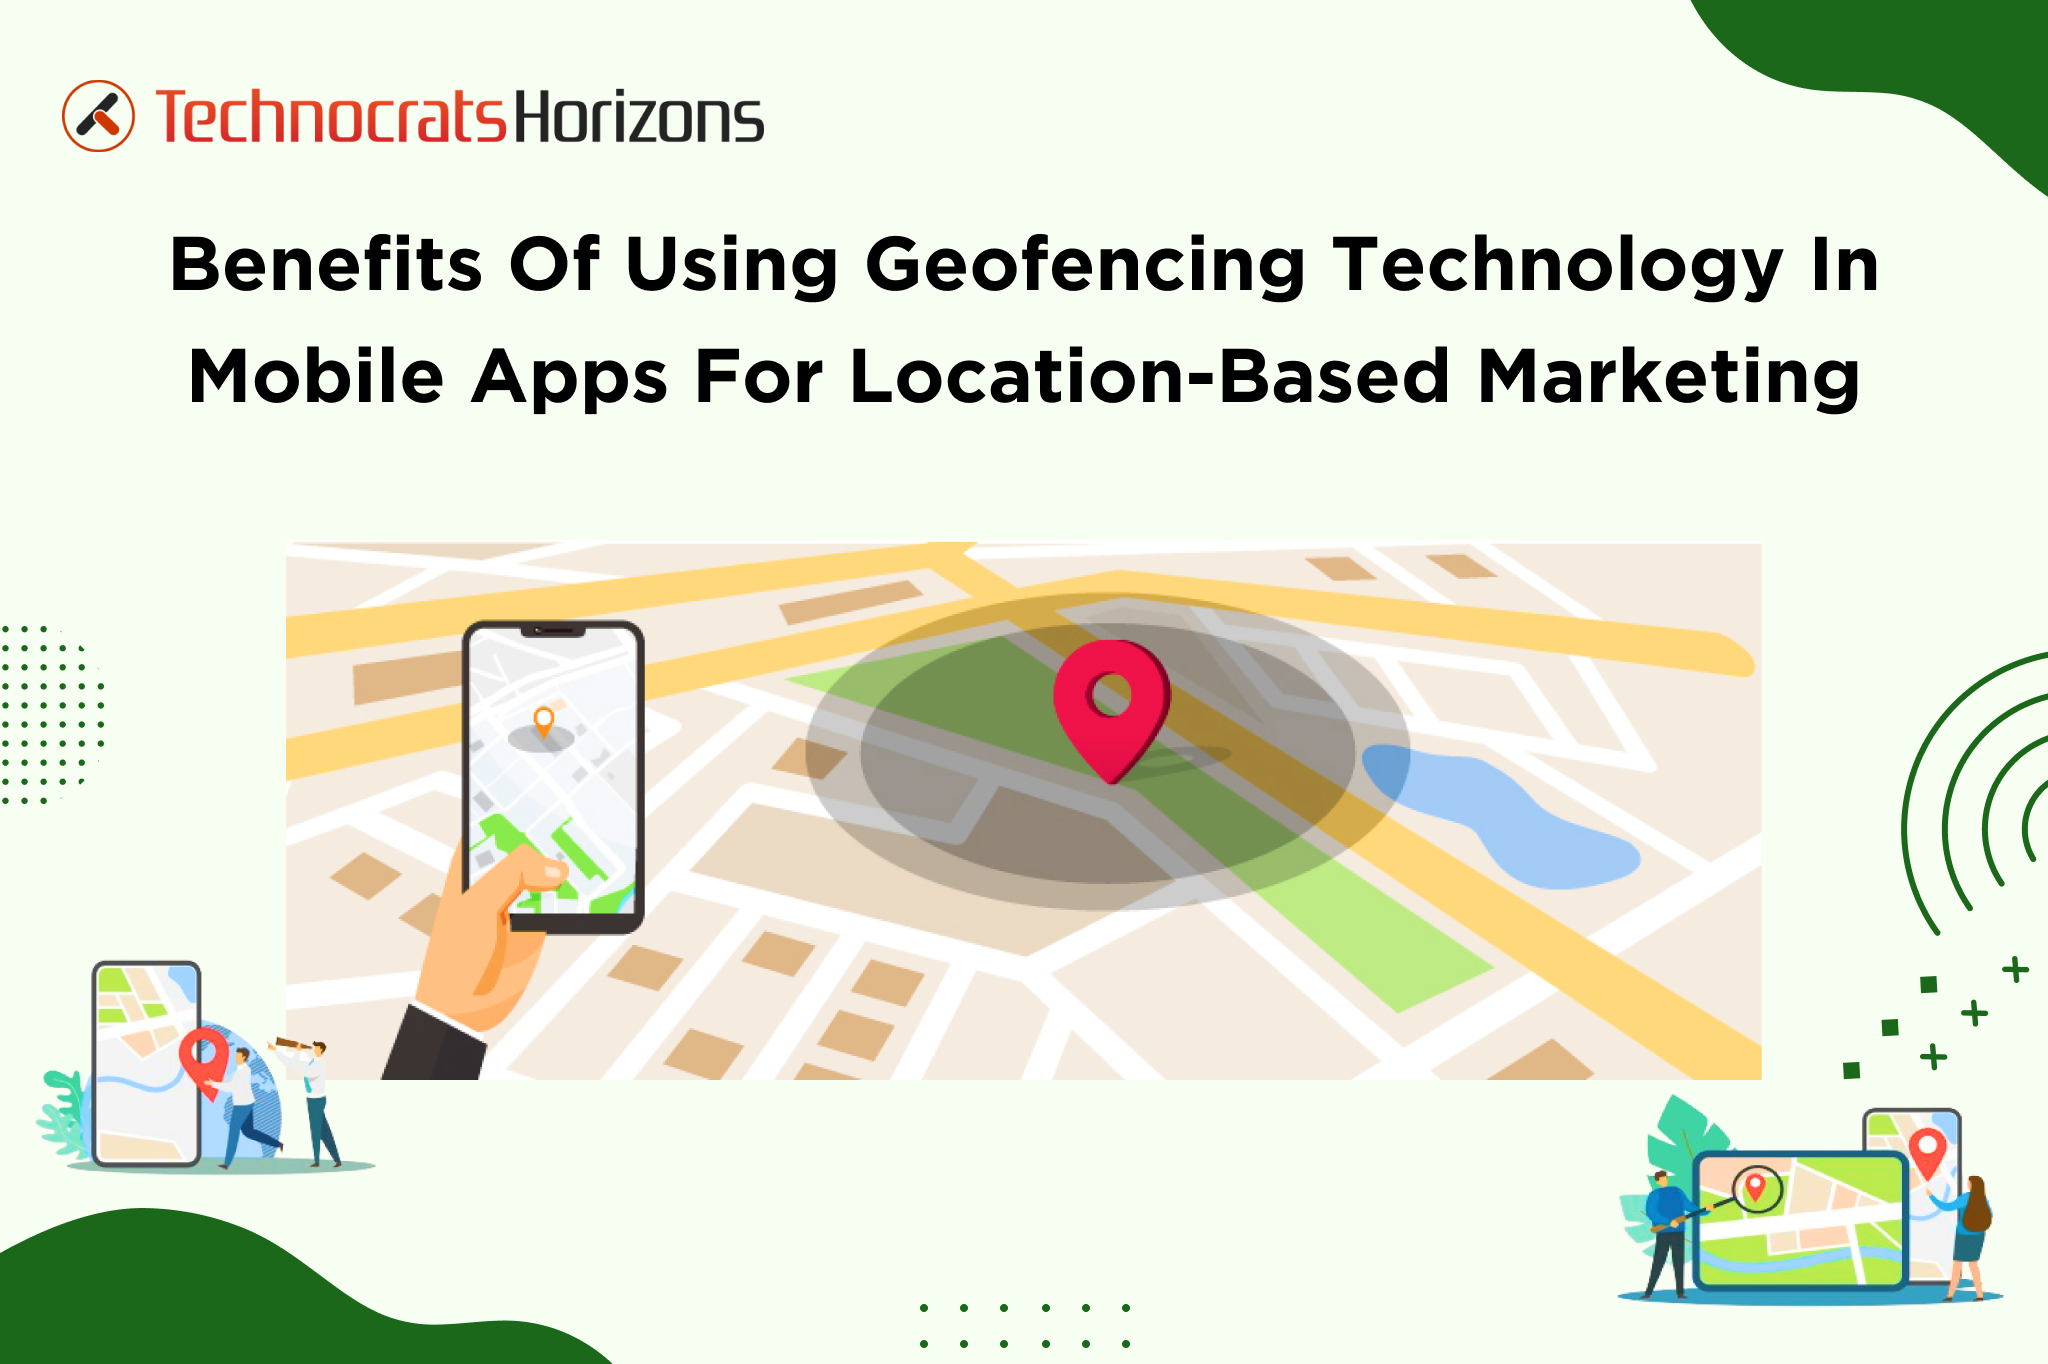 Benefits of Using Geofencing Technology in Mobile Apps for Location-Based Marketing